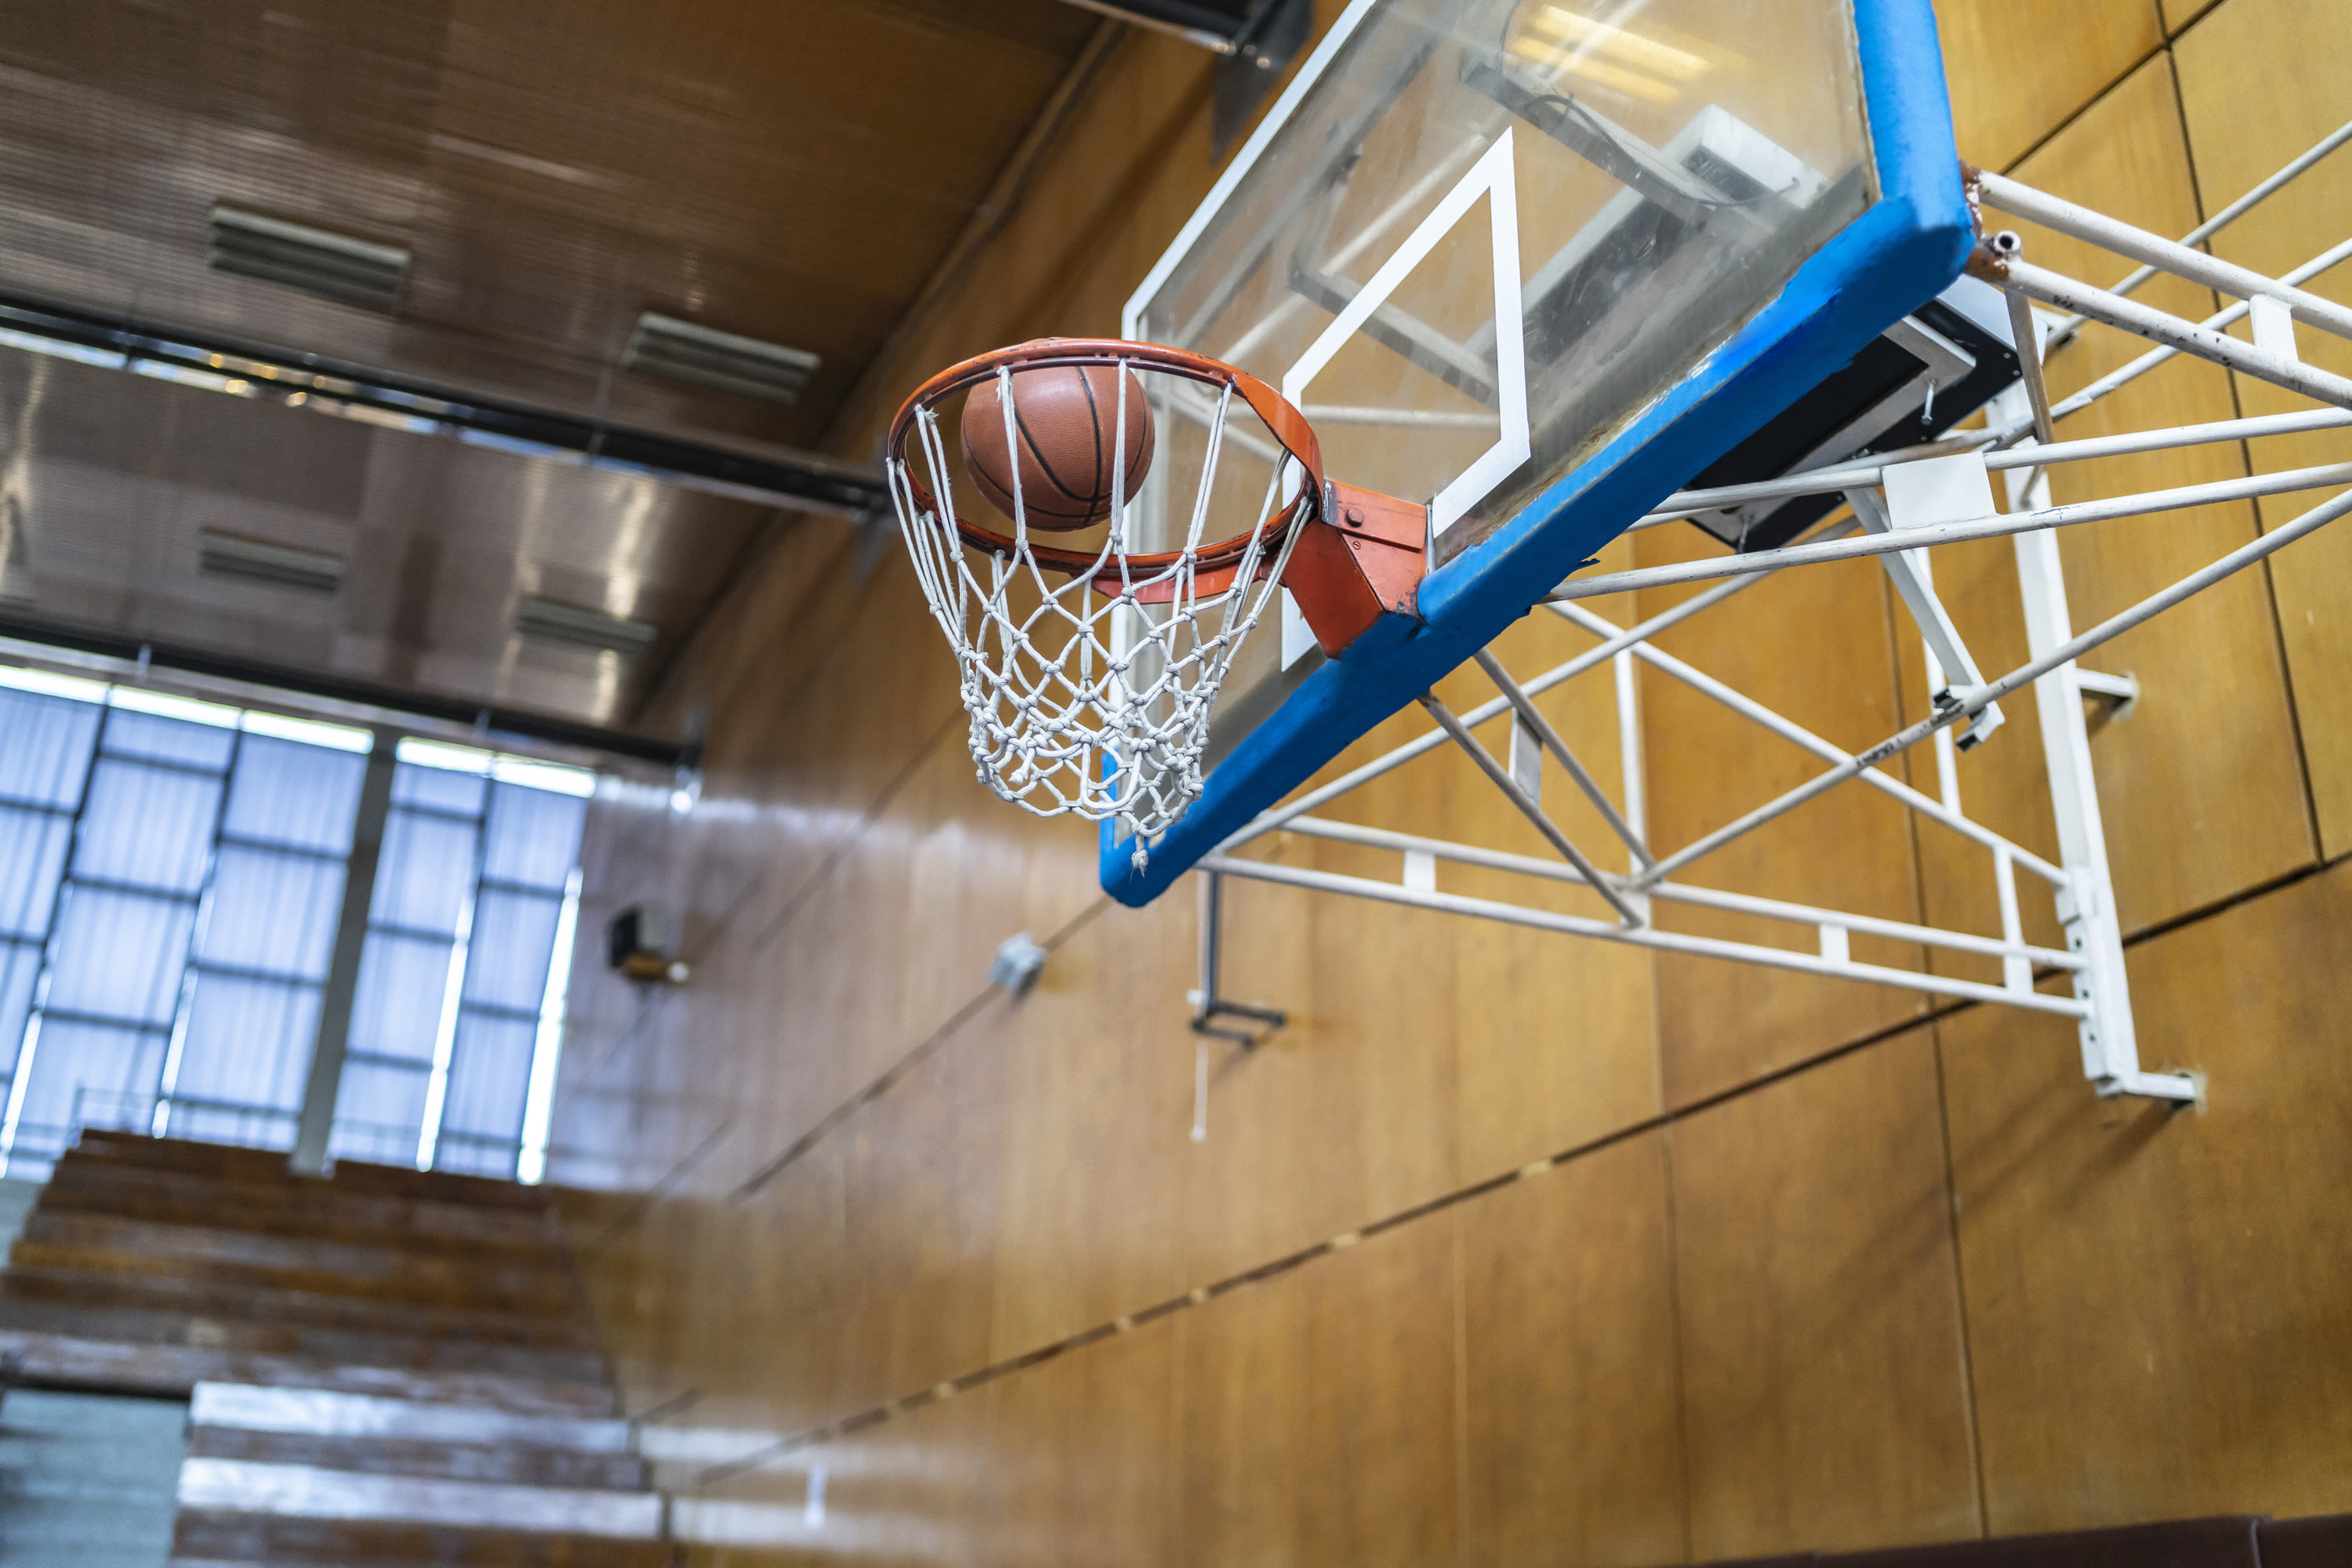 a basketball going through a hoop in the school gym